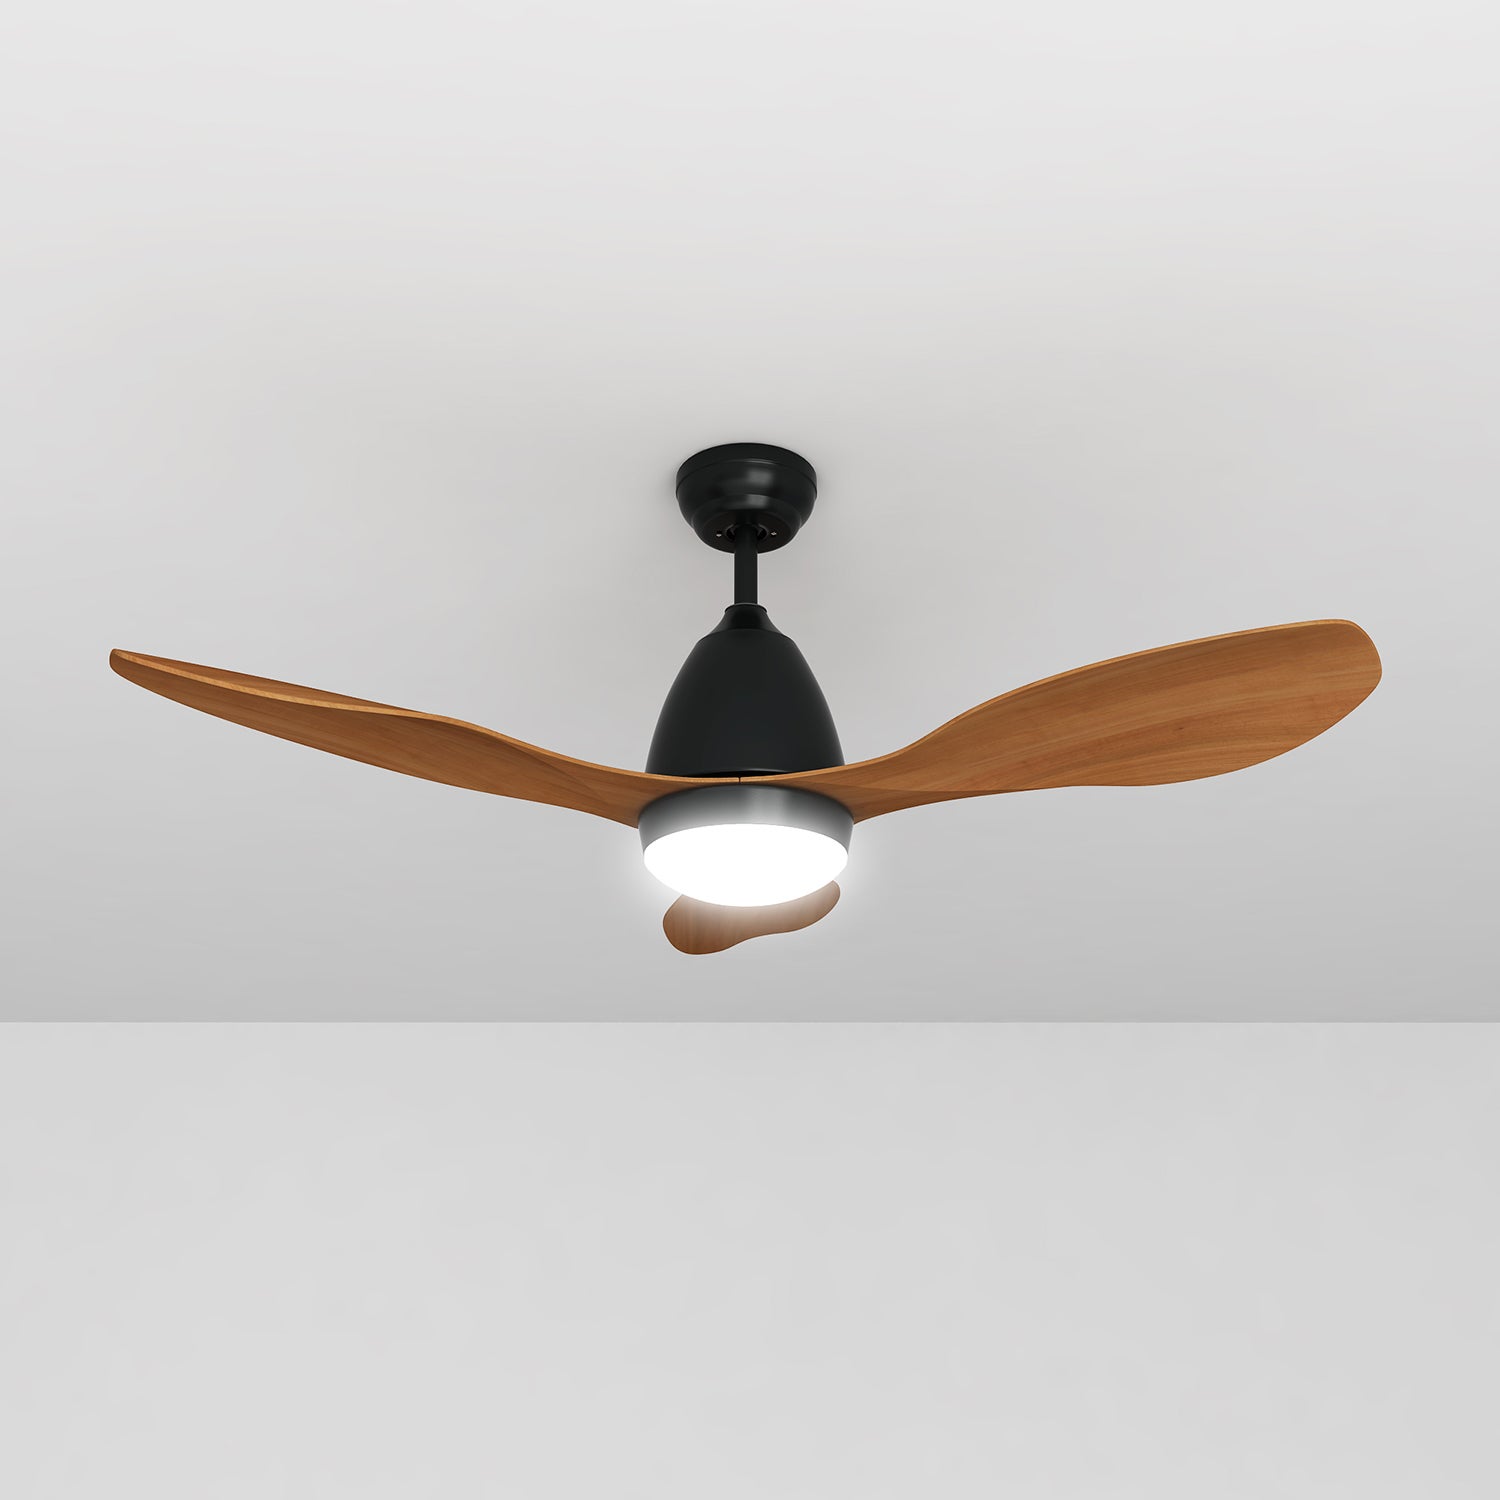 ELEGANT LED Light Ceiling Fan DC 1200mm 3 Blades With Remote Control Variable color